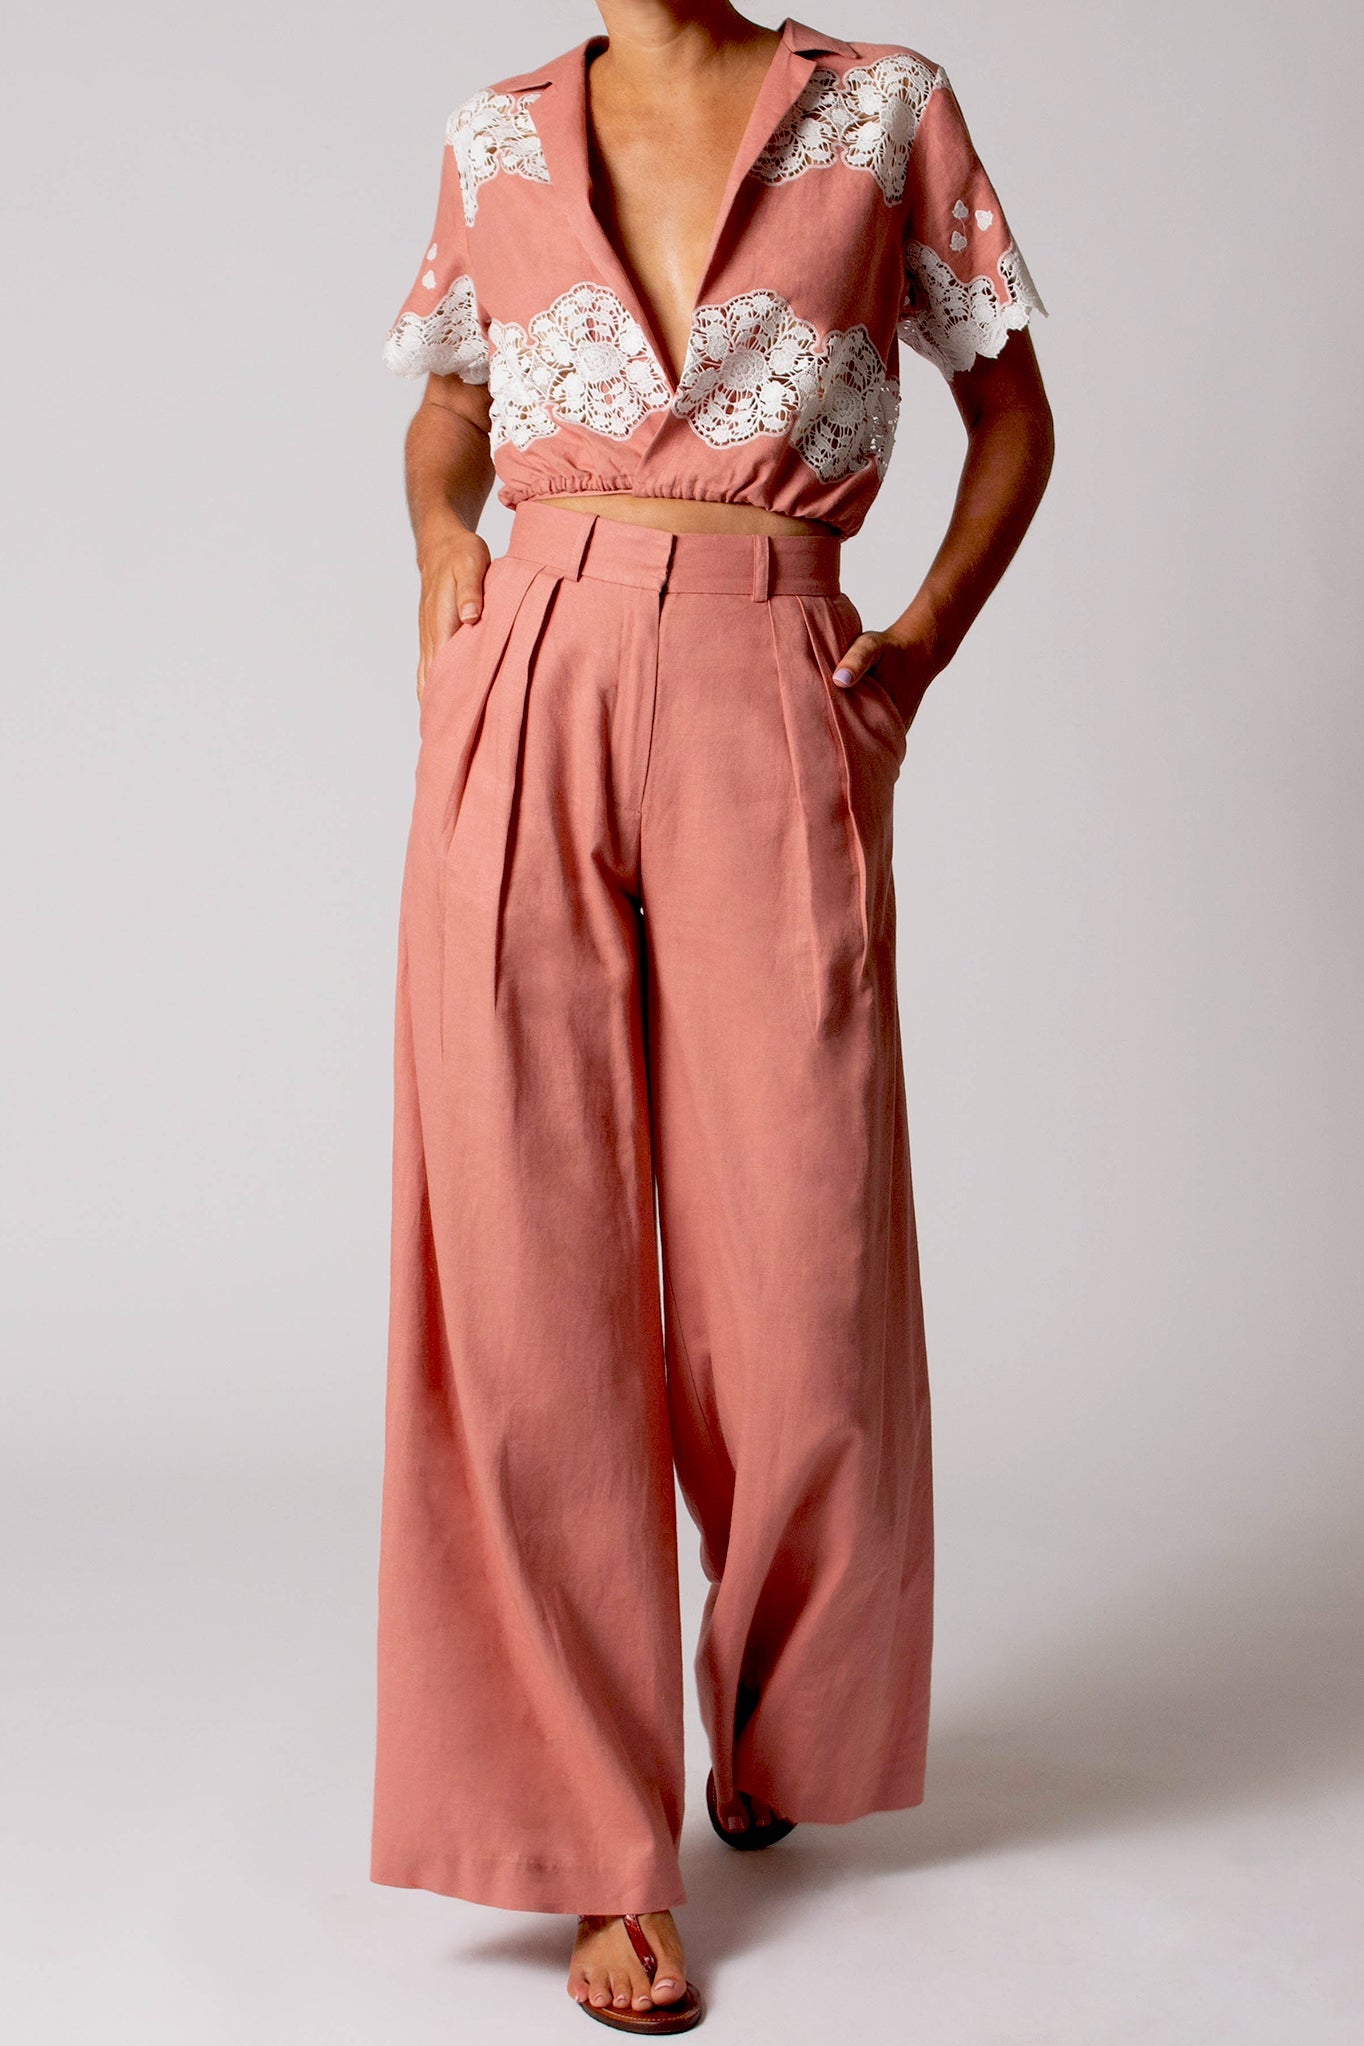 Brooklyn Cloisters Embroidery Linen Wrap Top - Dusty Rose by Miguelina